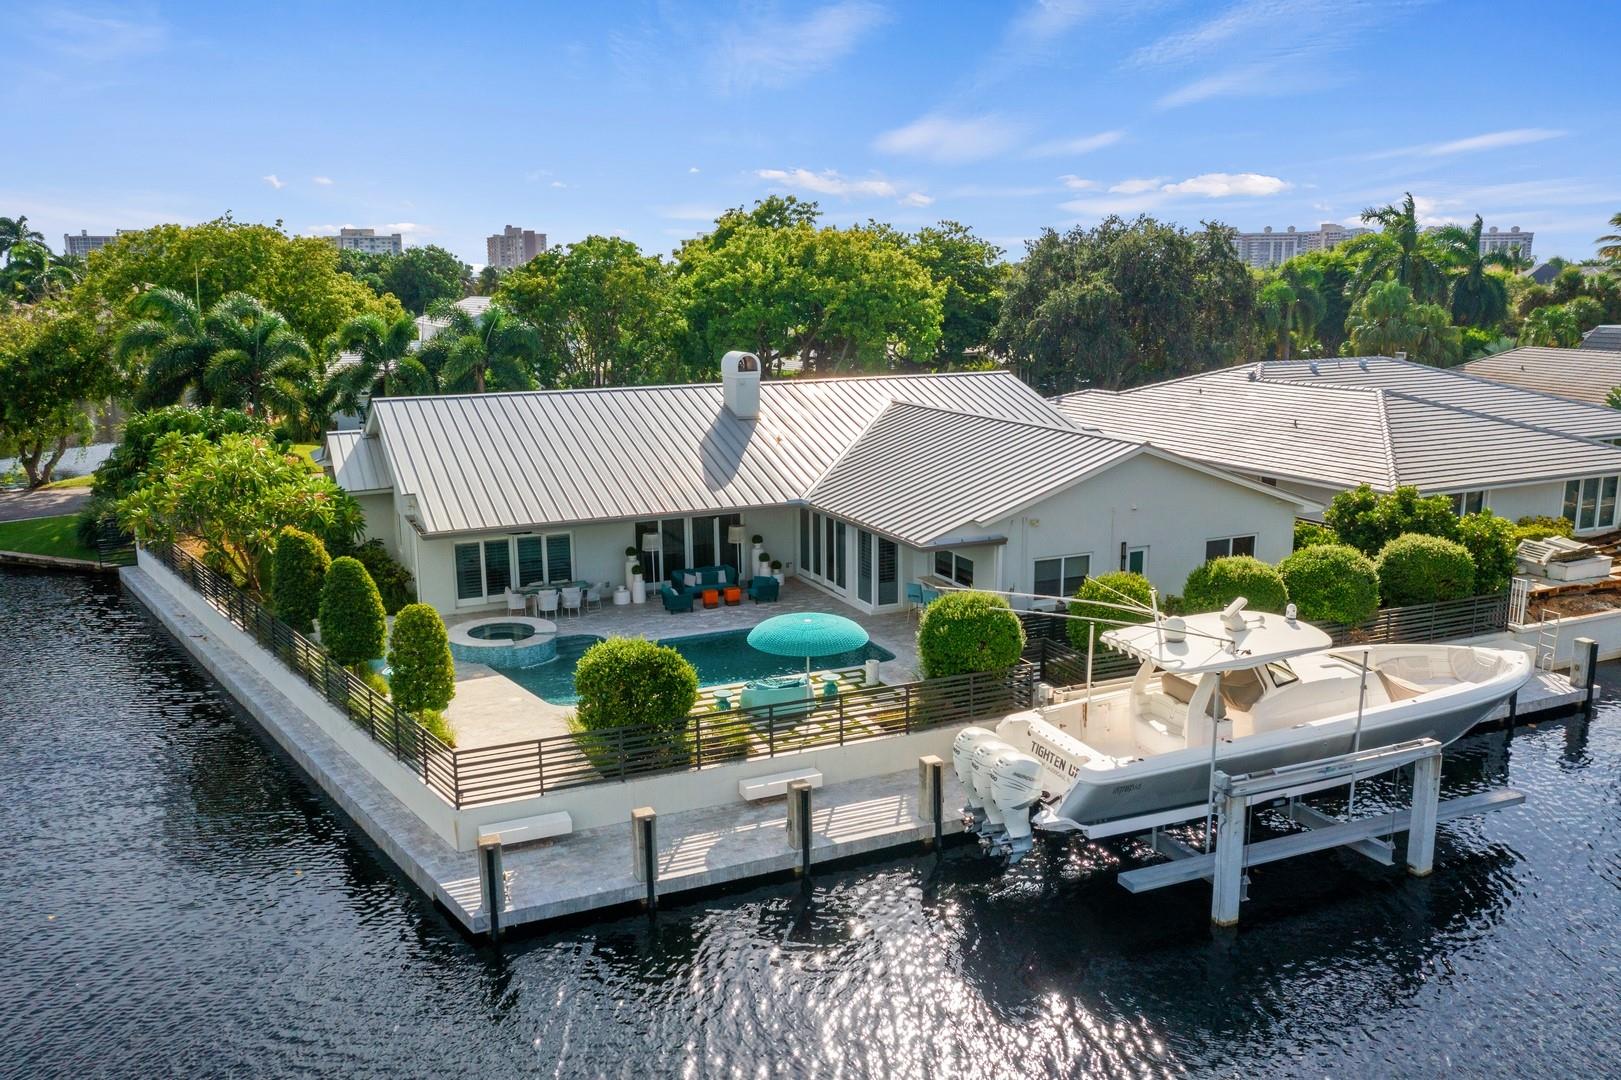 This elegant California style transitional residence is situated on an interior point lot with +/- 212FT of waterfront in the guard gated community of Bay Colony. Bay Colony is a 24 hour secured, patrolled community with spectacular treelined streets. Completely renovated in 2018, this 4 Bedroom, 4 bathroom single story residence features a foyer entrance, generous master suite, formal living and dining areas as well as a more modern open floor plan for the family room, kitchen, breakfast and wraparound bar, all with pool and waterfront views. Well appointed guest rooms feature stunningly finished en-suites. The waterfront salt chlorinated and heated pool with spa sits on the gorgeous landscaped patio overlooking the water and +/- 92FT dock with boat lift.